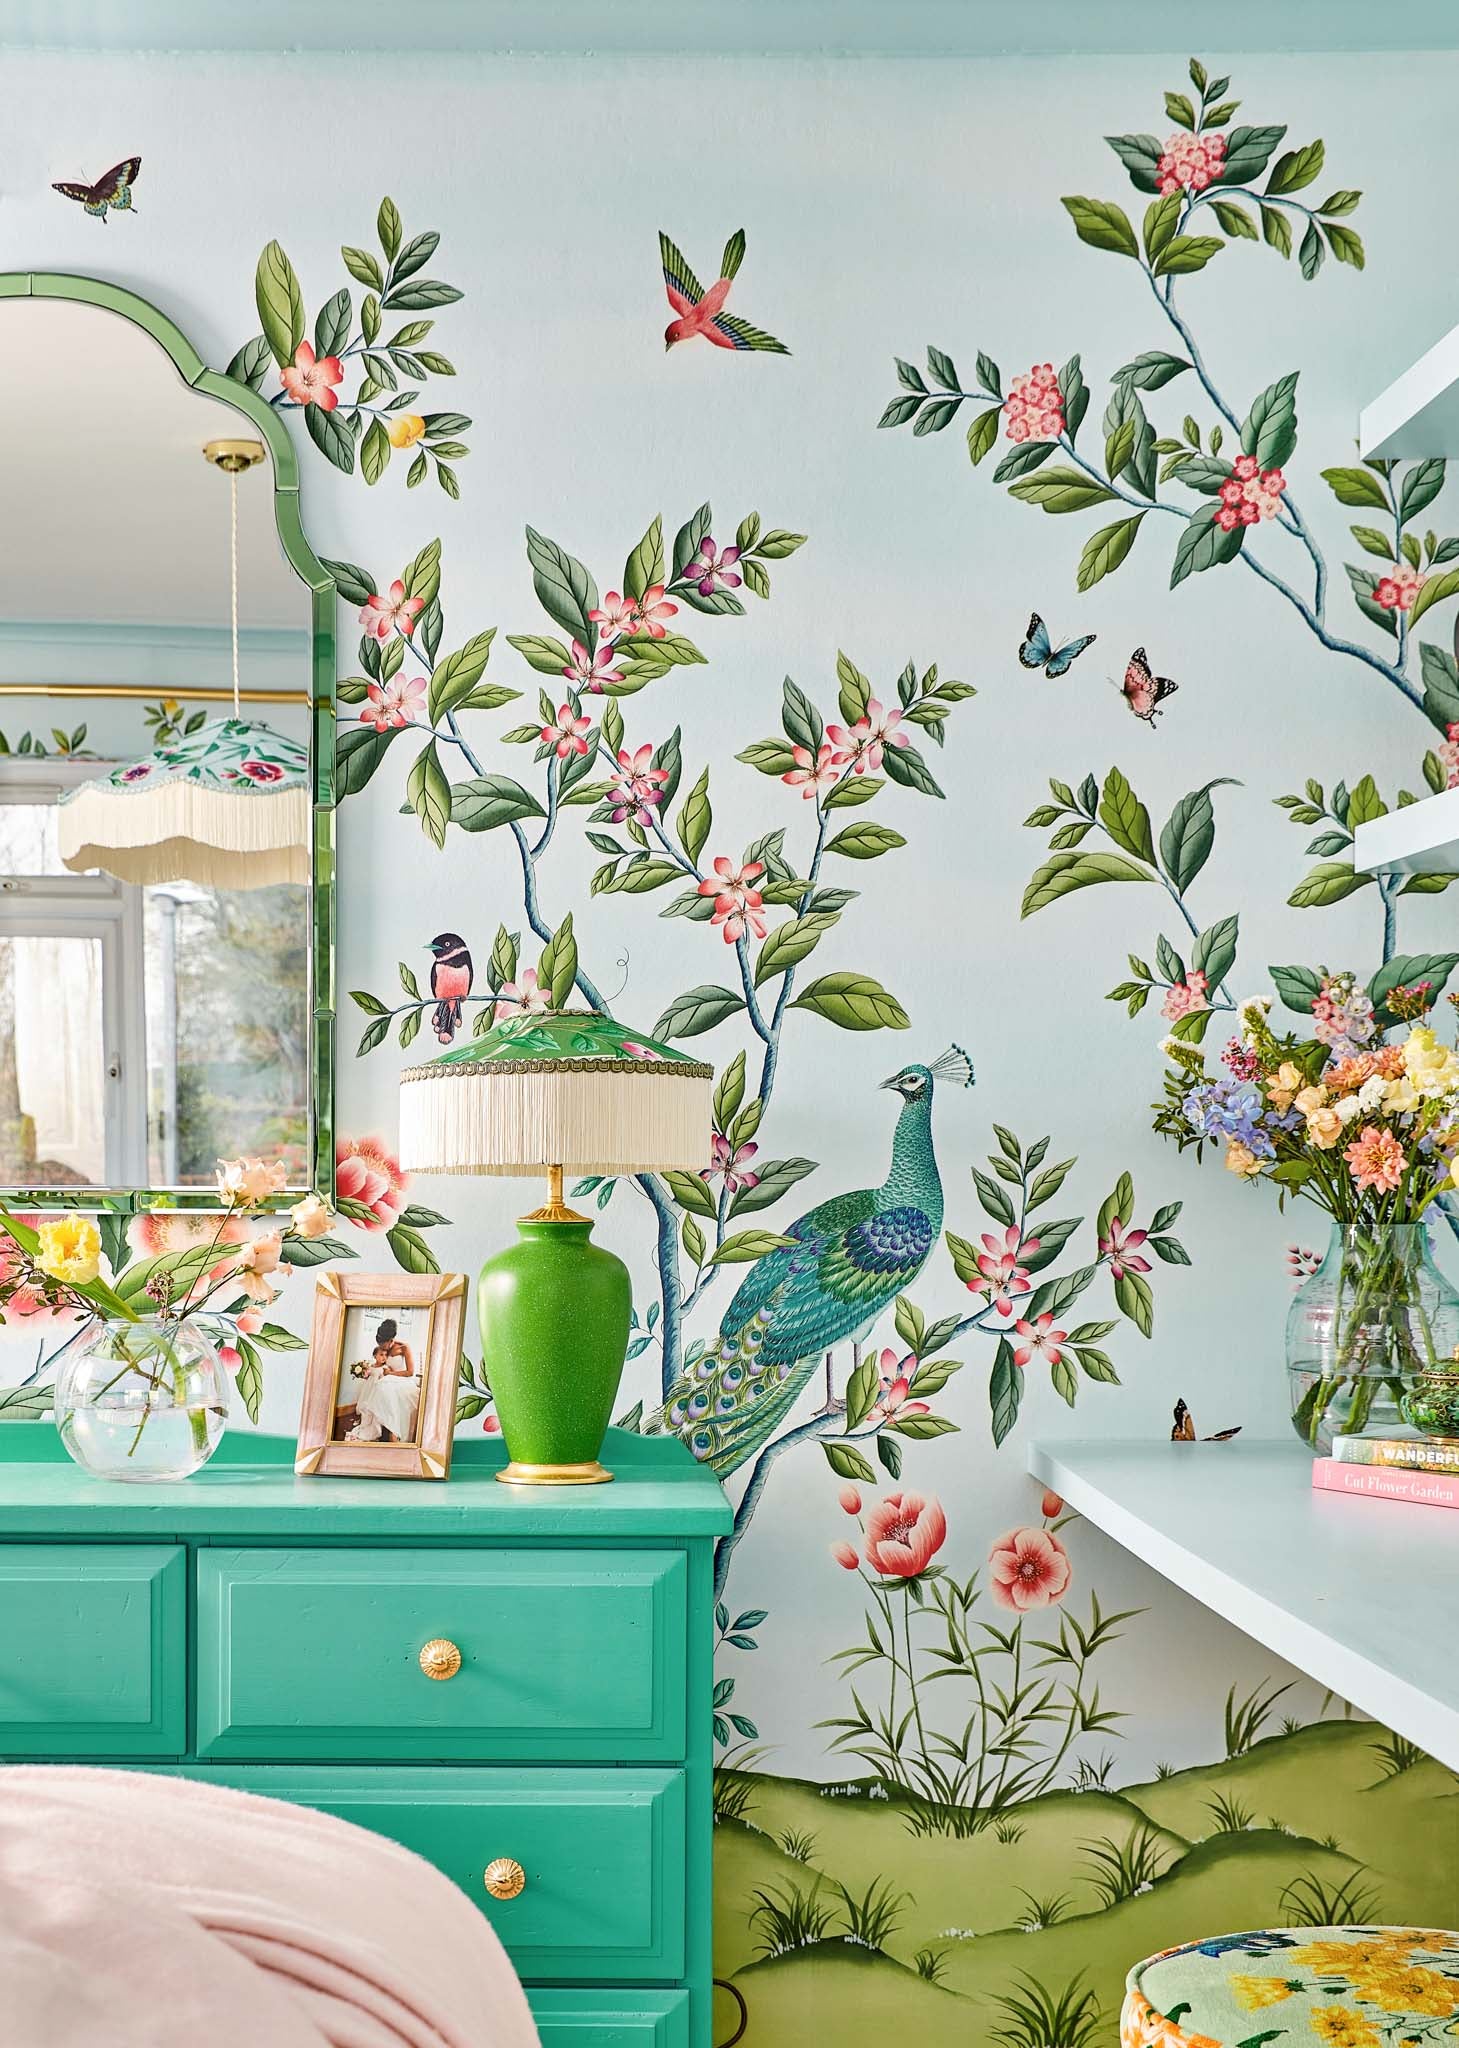 Diane Hill's 'Florence' wallpaper featured in her bedroom